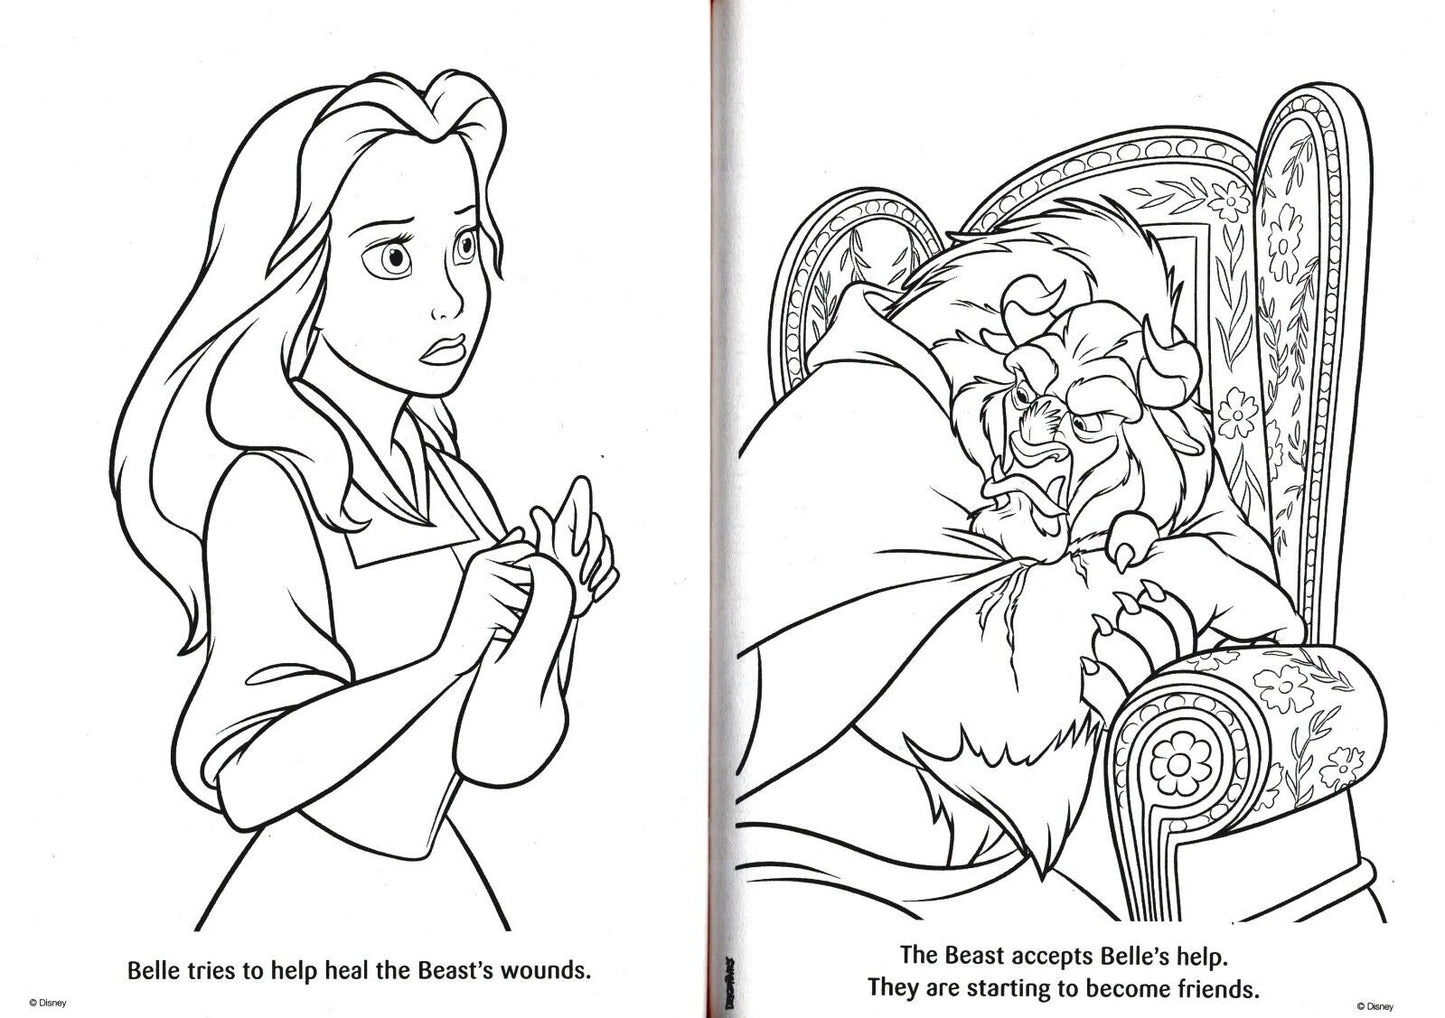 The Princess and the Frog & Beauty and the Beast - Coloring & Activity Book v2